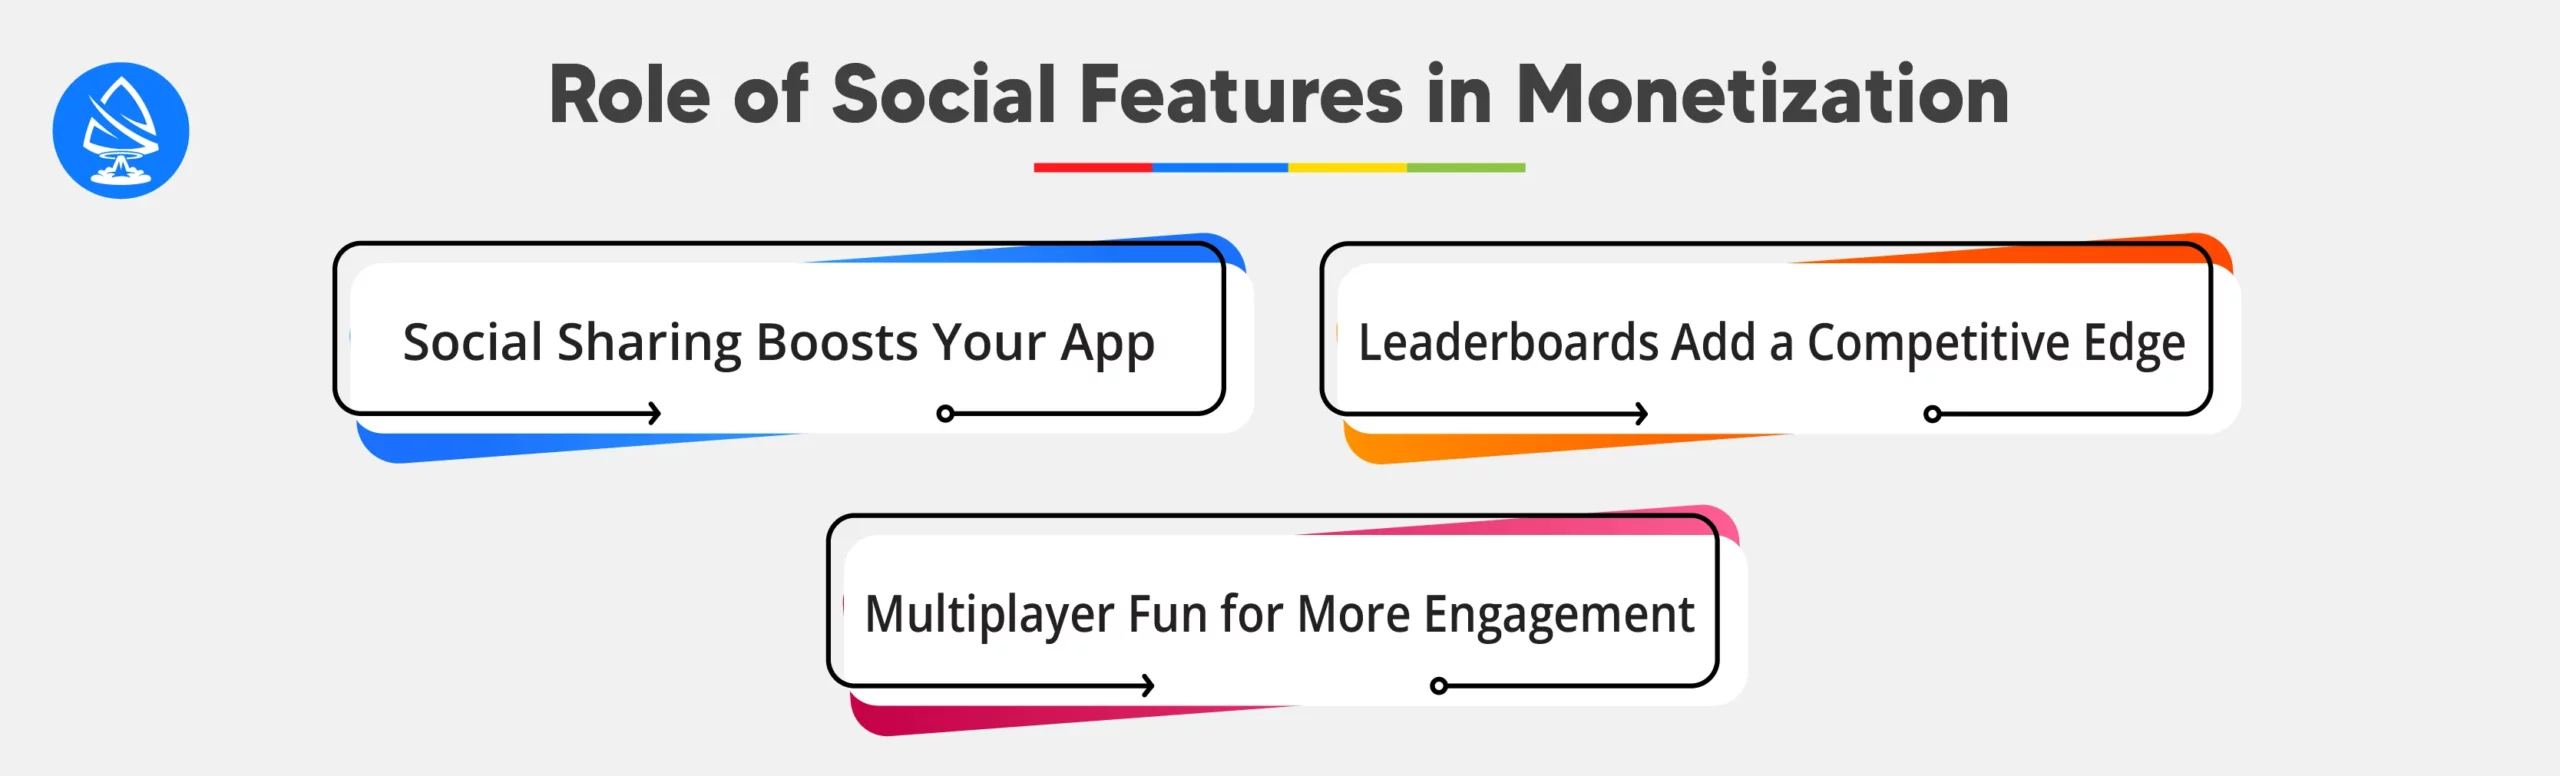 The Role of Social Features in Monetization